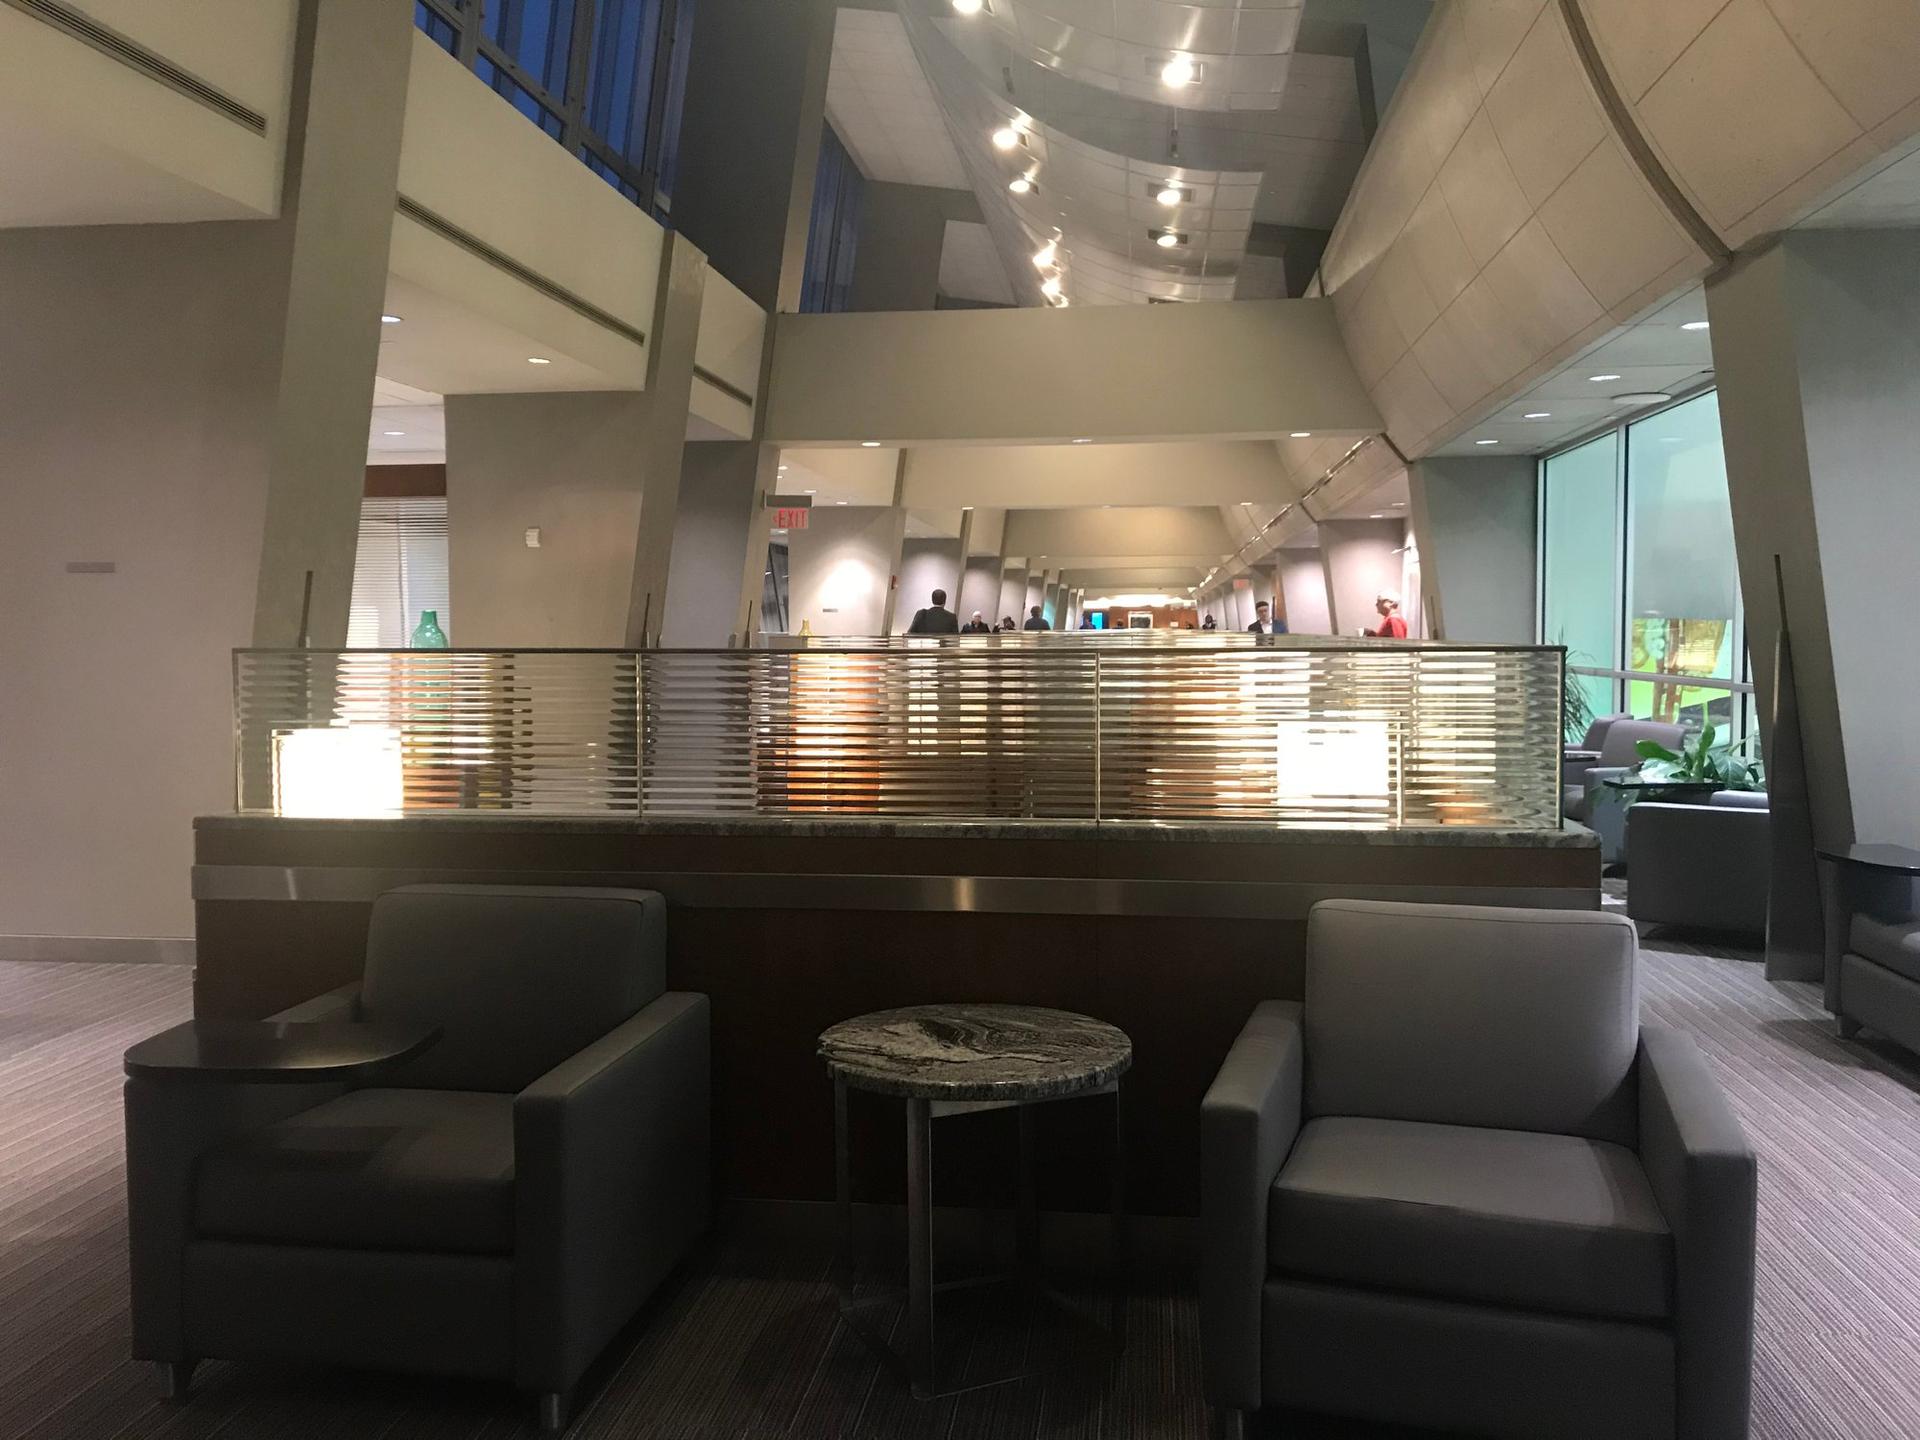 American Airlines Admirals Club image 30 of 48